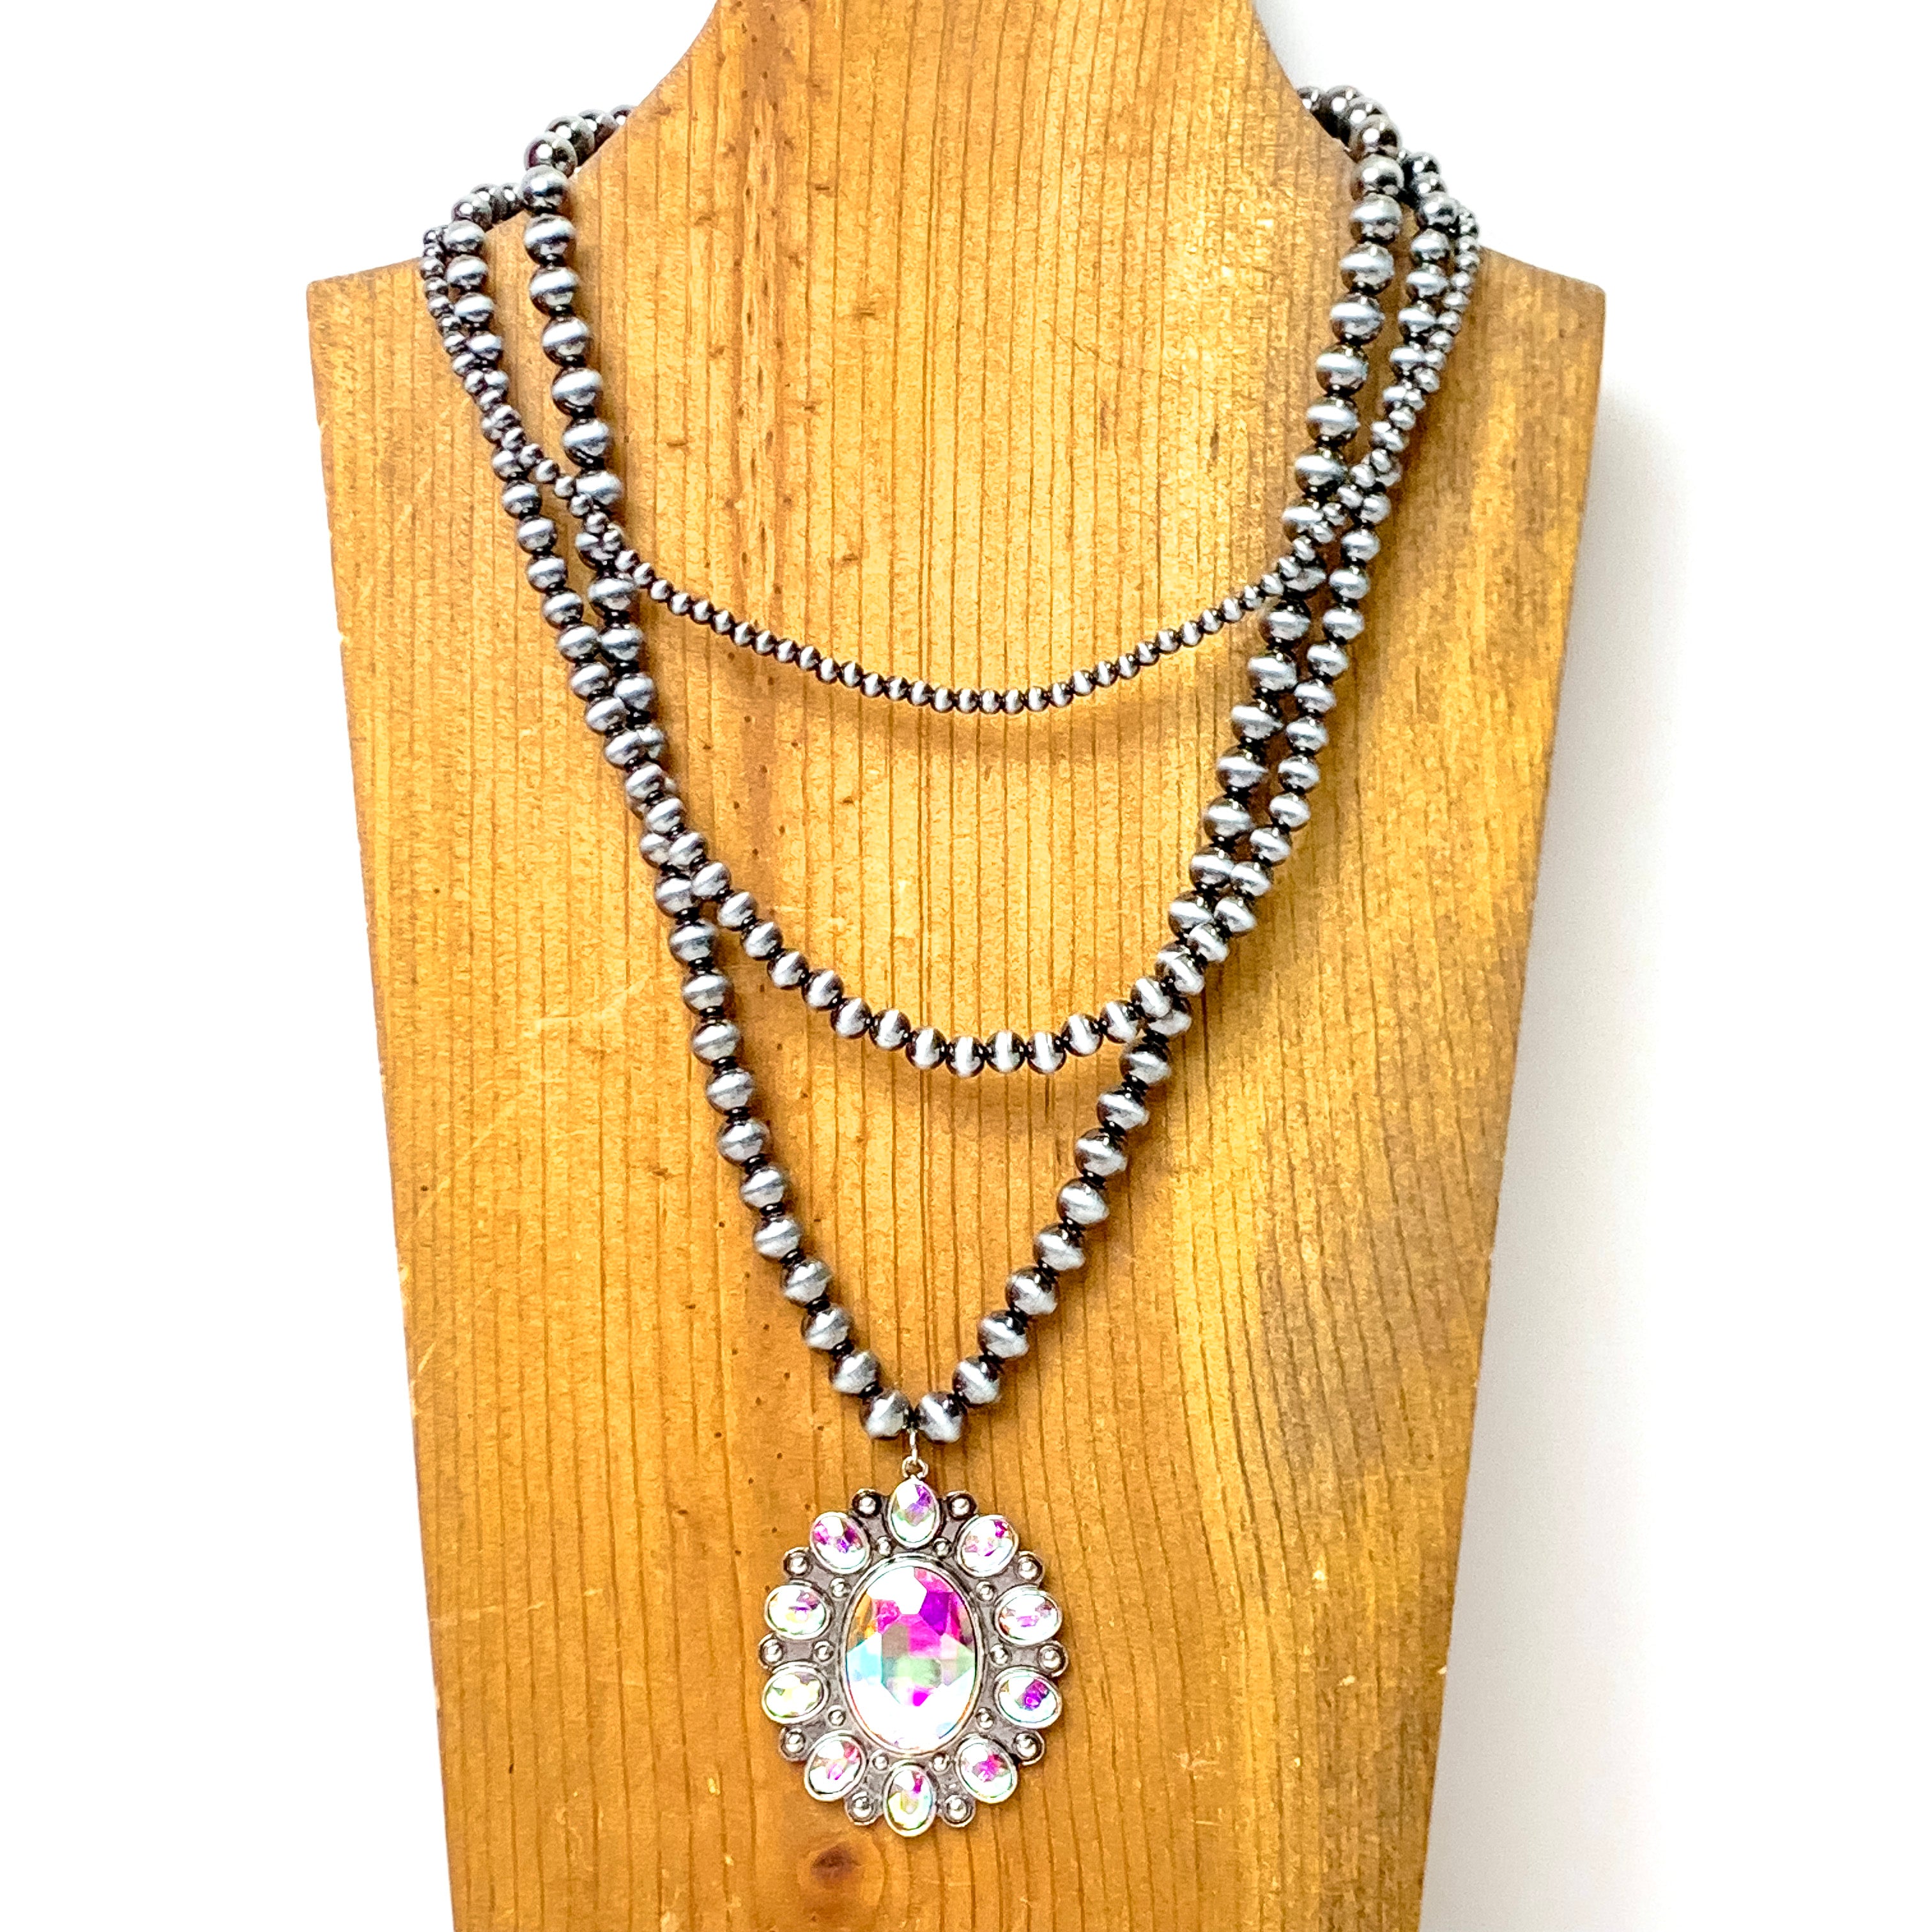 Southwest Splendor Faux Navajo Pearl Necklace in Silver Tone - Giddy Up Glamour Boutique